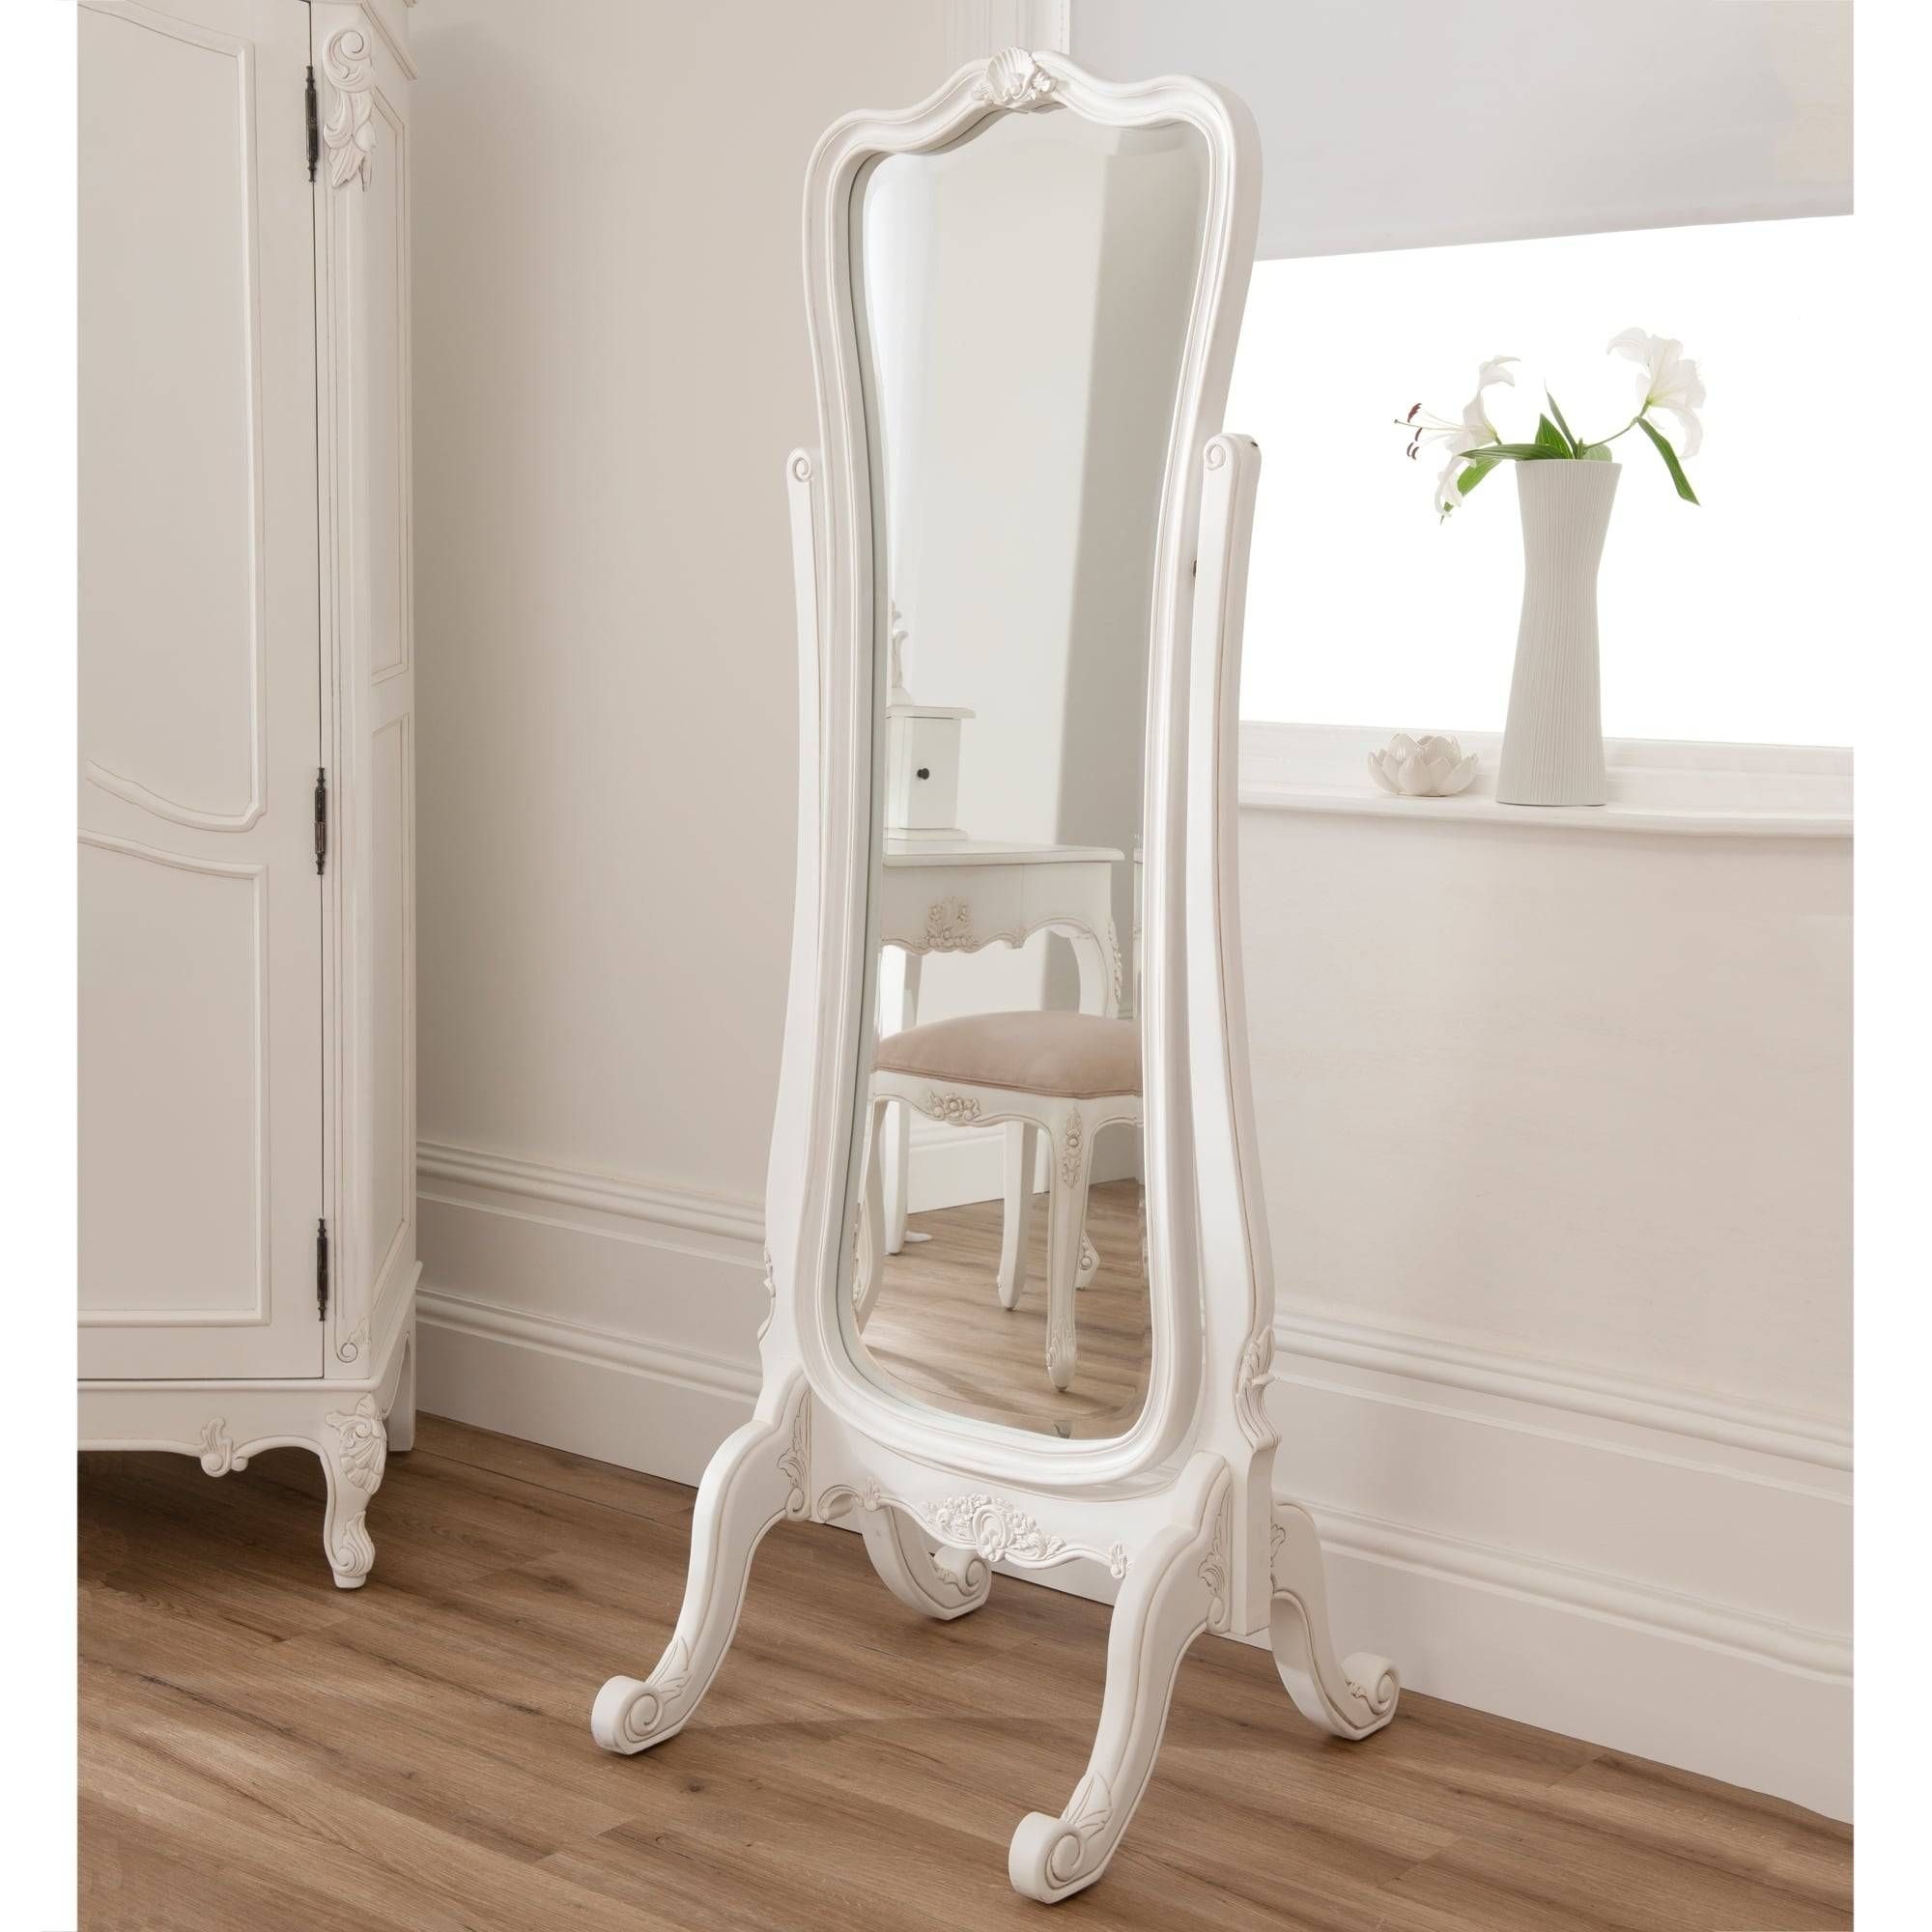 Beautiful White Baroque Floor Mirror A 5 Thrift Old Barn Wood Throughout White Baroque Floor Mirrors (View 5 of 25)